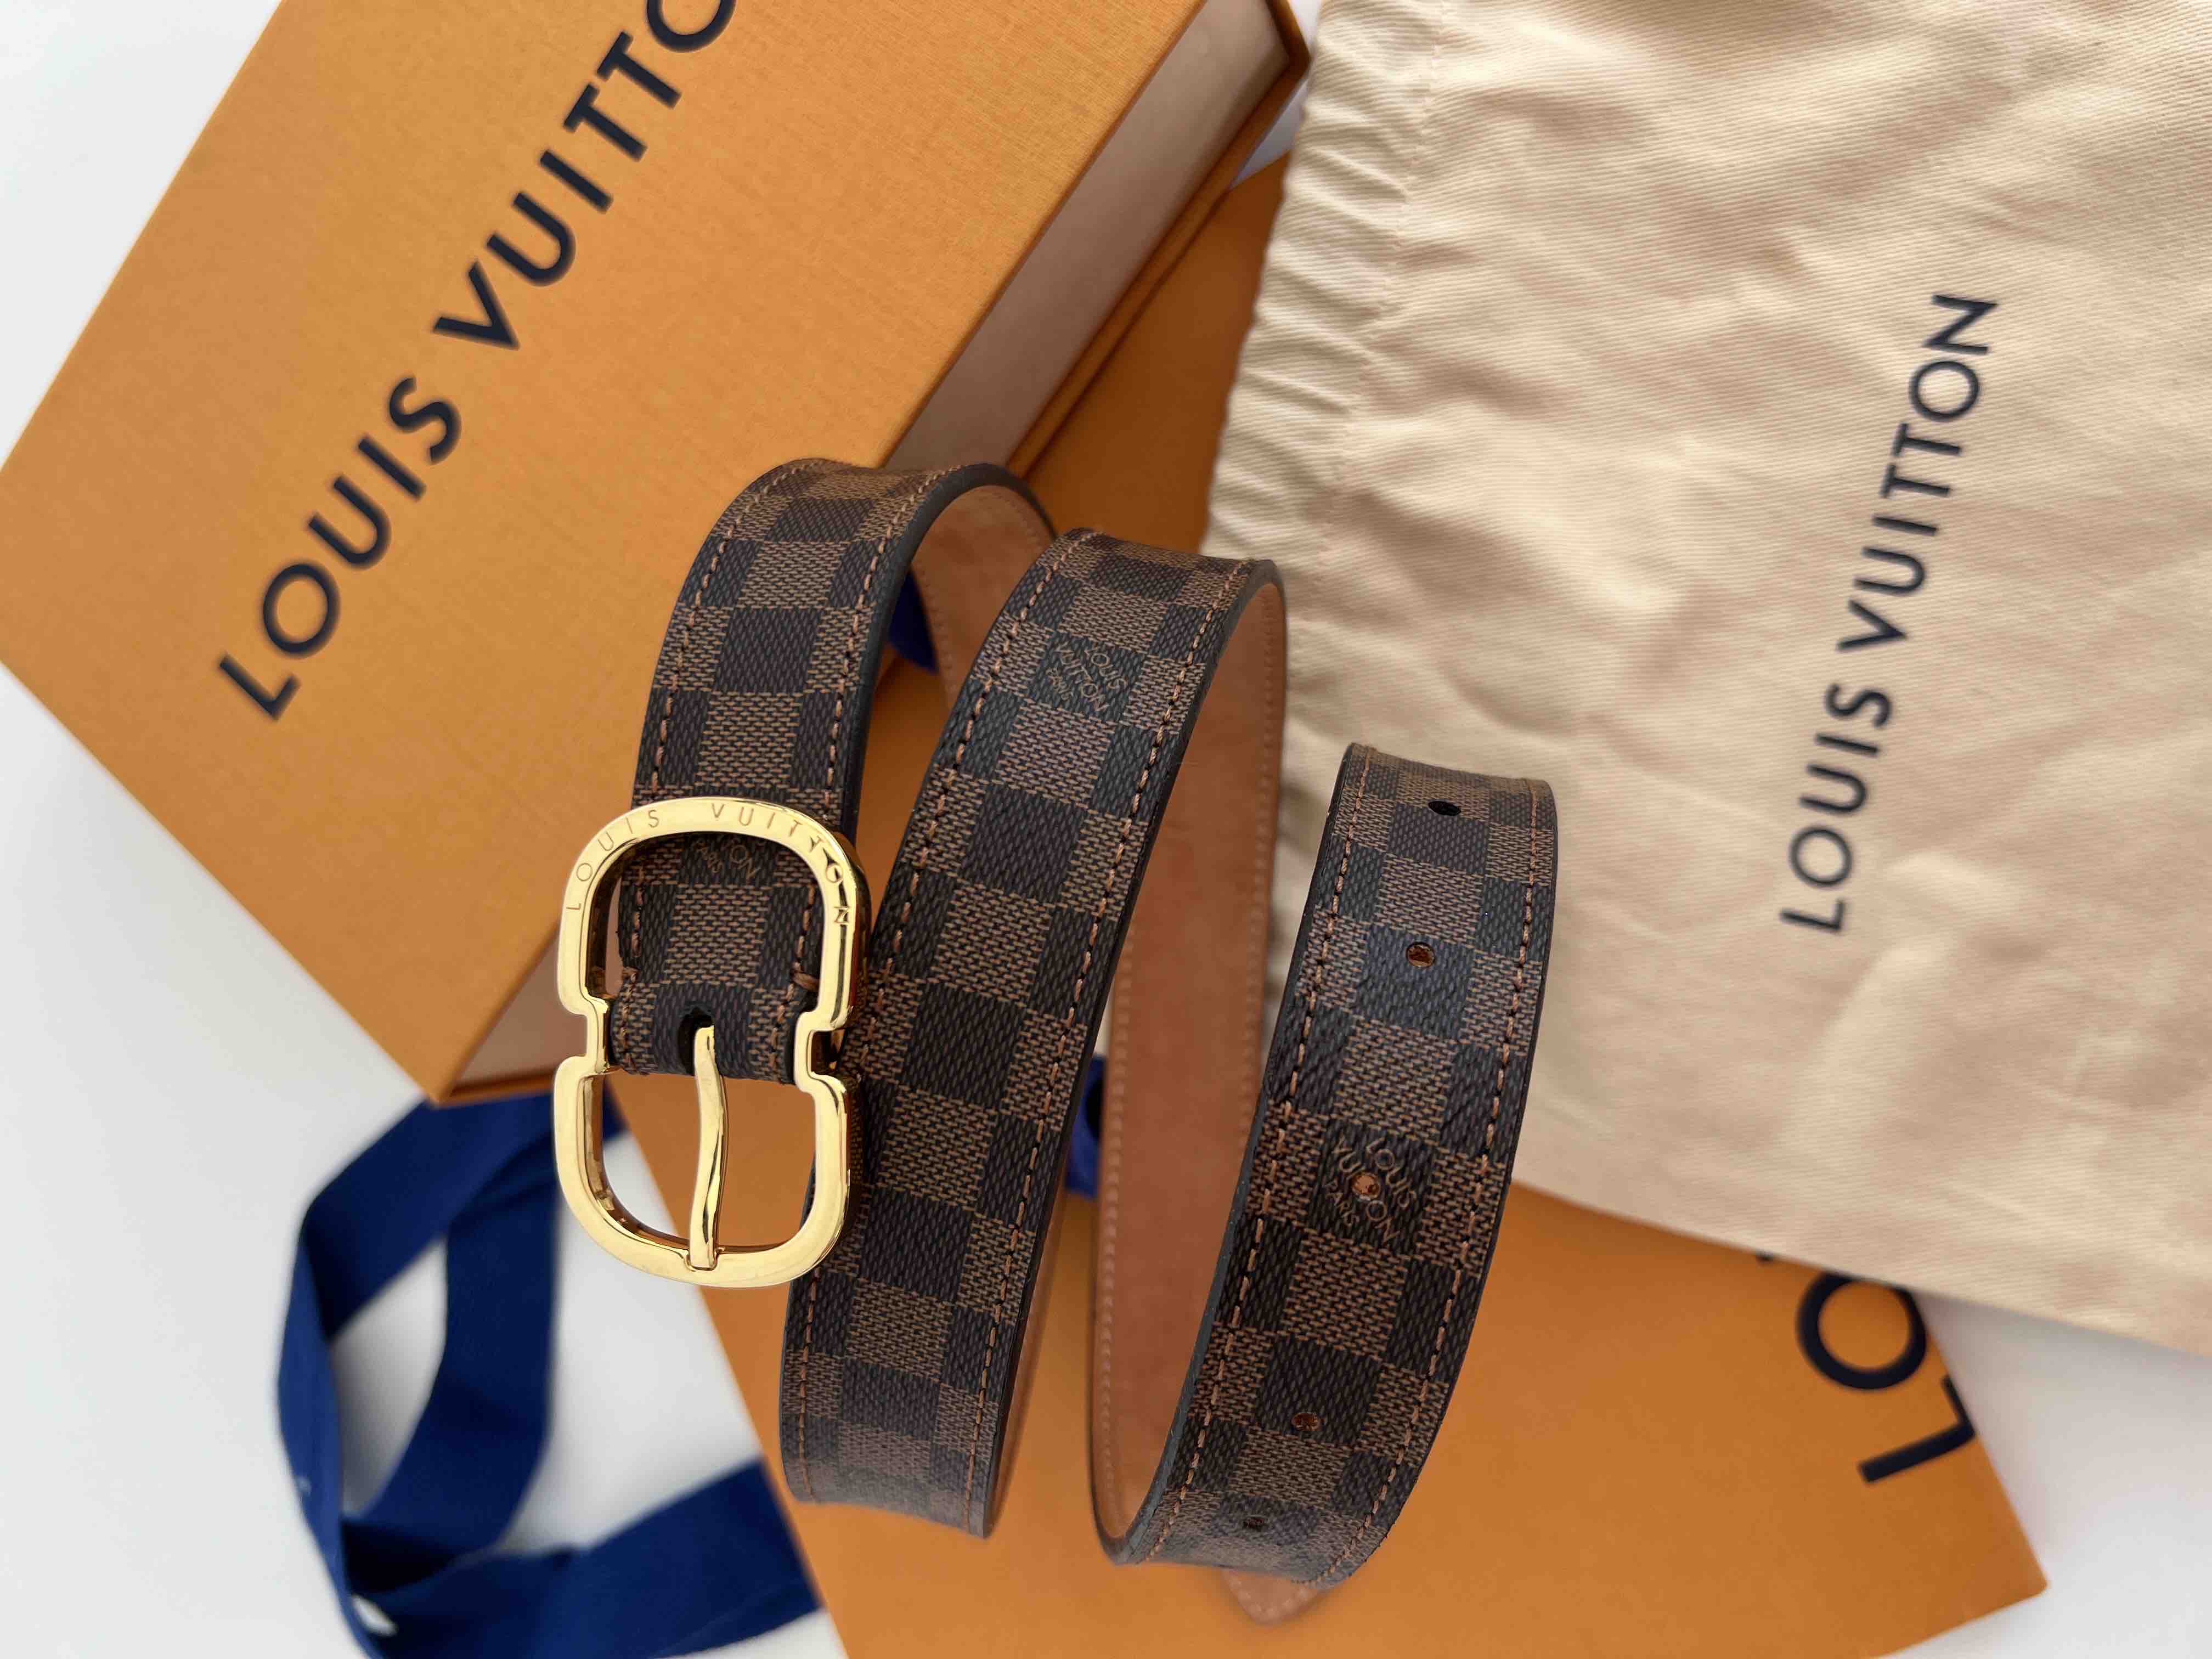 Louis Vuitton Damier azur Christmas Animation Hollywood bag charm 2021.  Made in France. Date code: BC0271